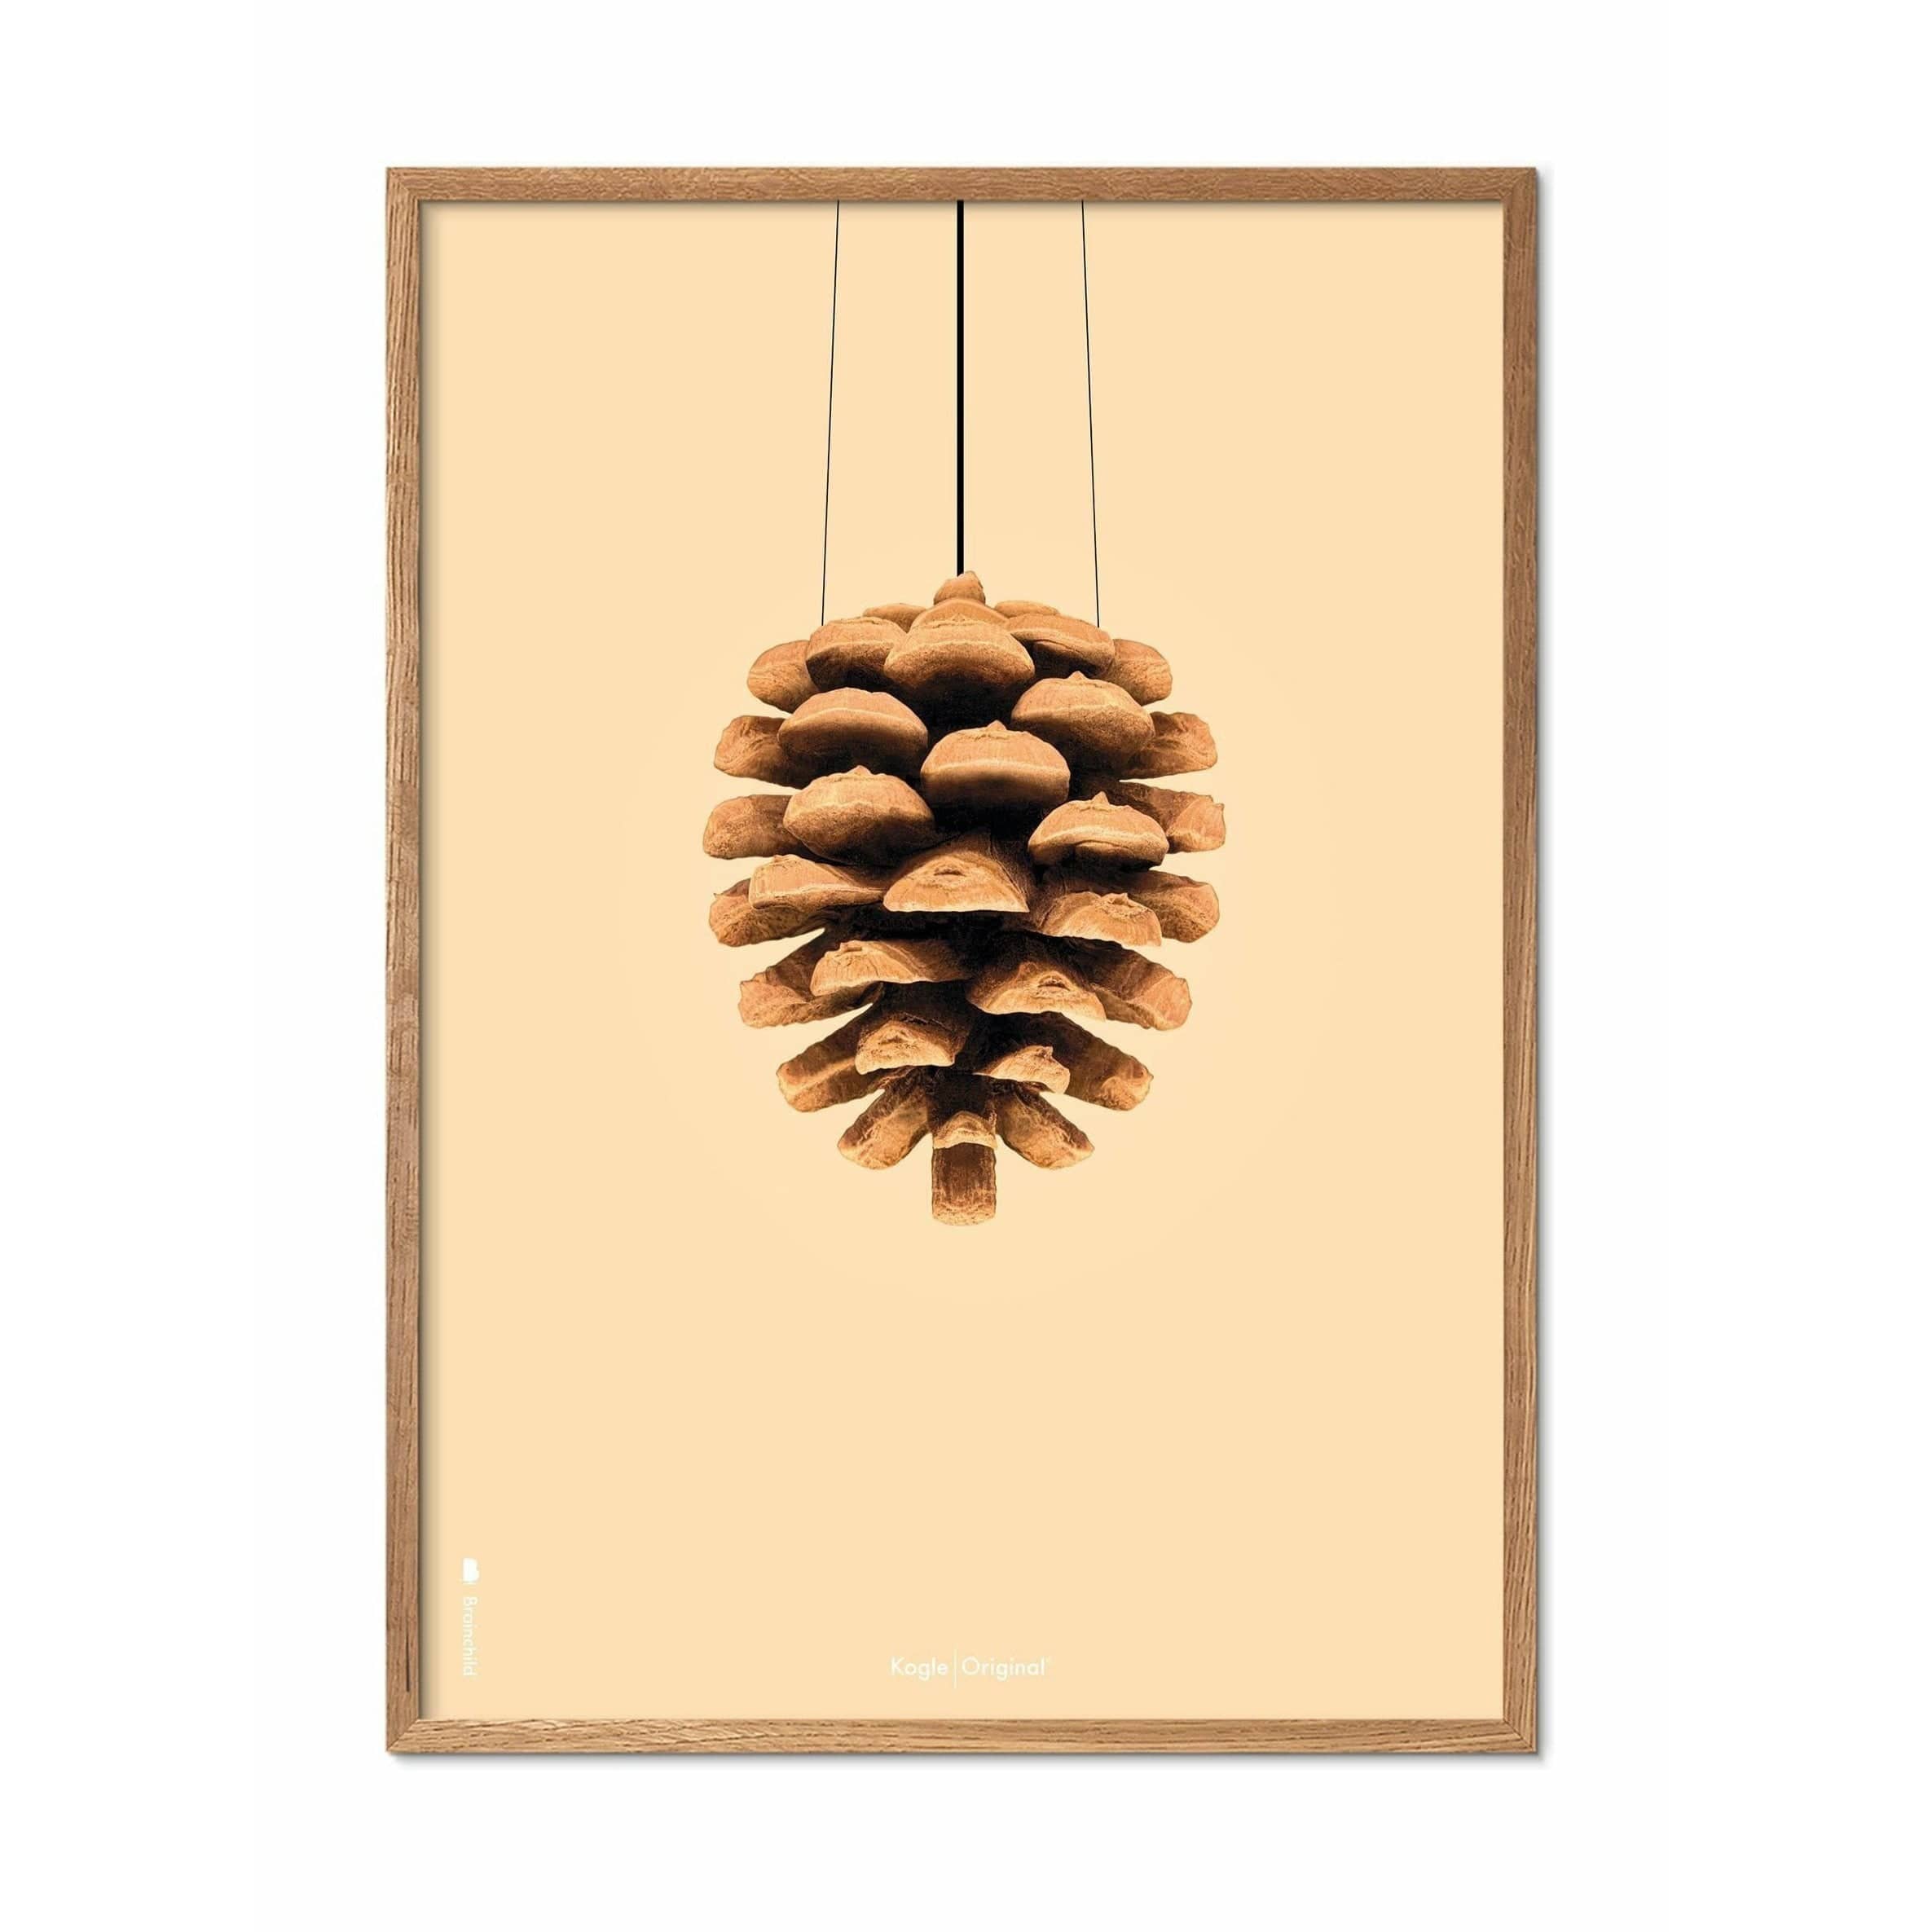 Brainchild Pine Cone Classic Poster, Frame Made Of Light Wood 70x100 Cm, Sand Colored Background